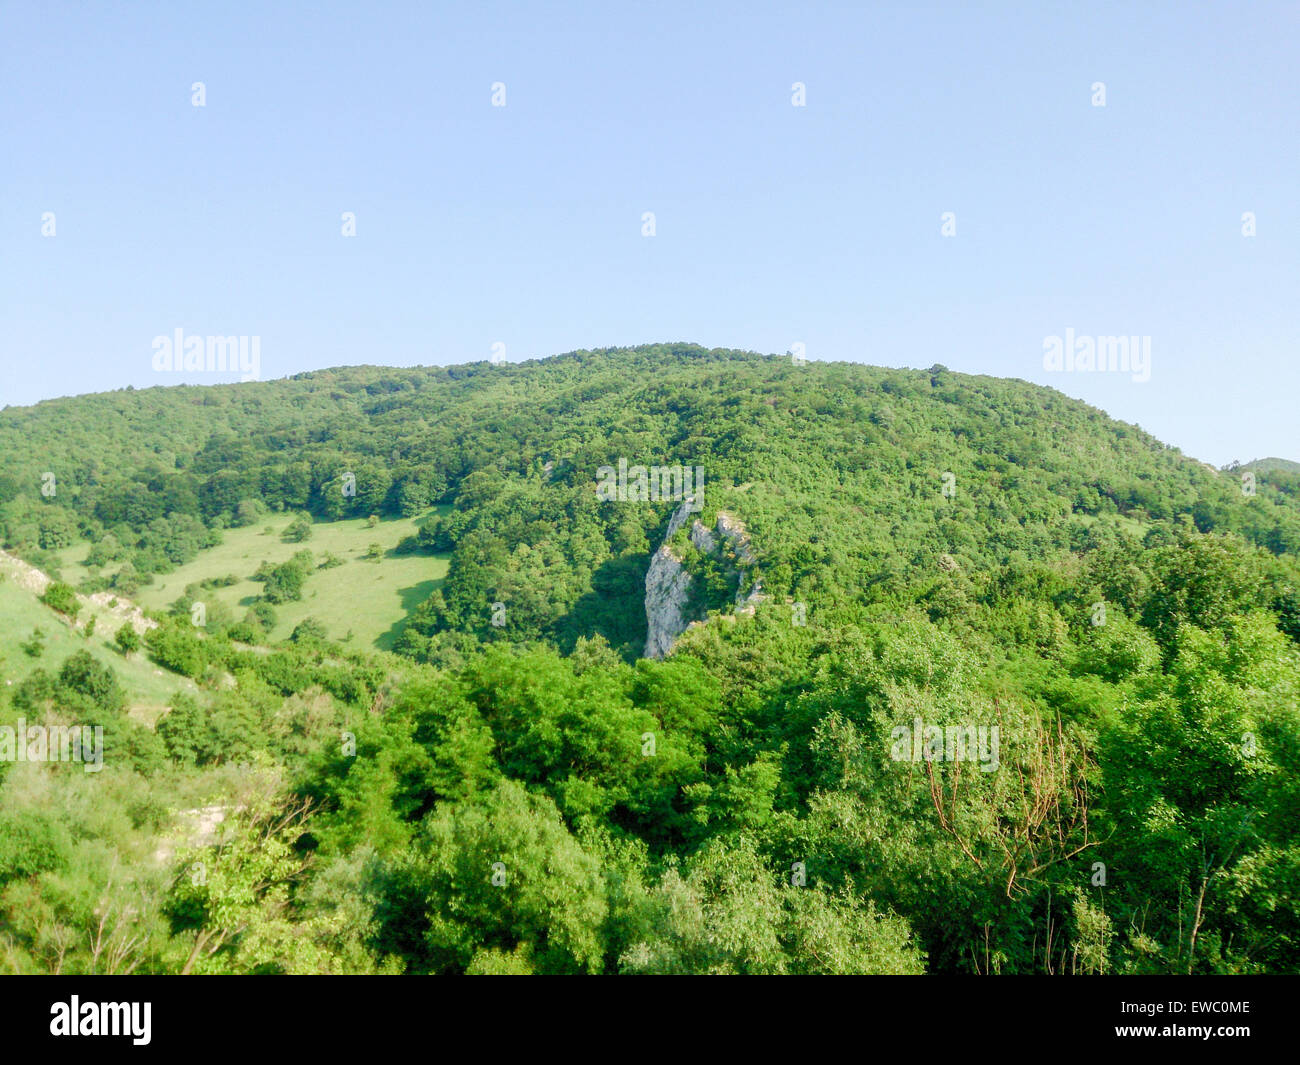 Forest in the mountains. Mountains landscape under clear daily sky with no clouds. Cheile Nerei-Beusnita National Park, Romania, Stock Photo